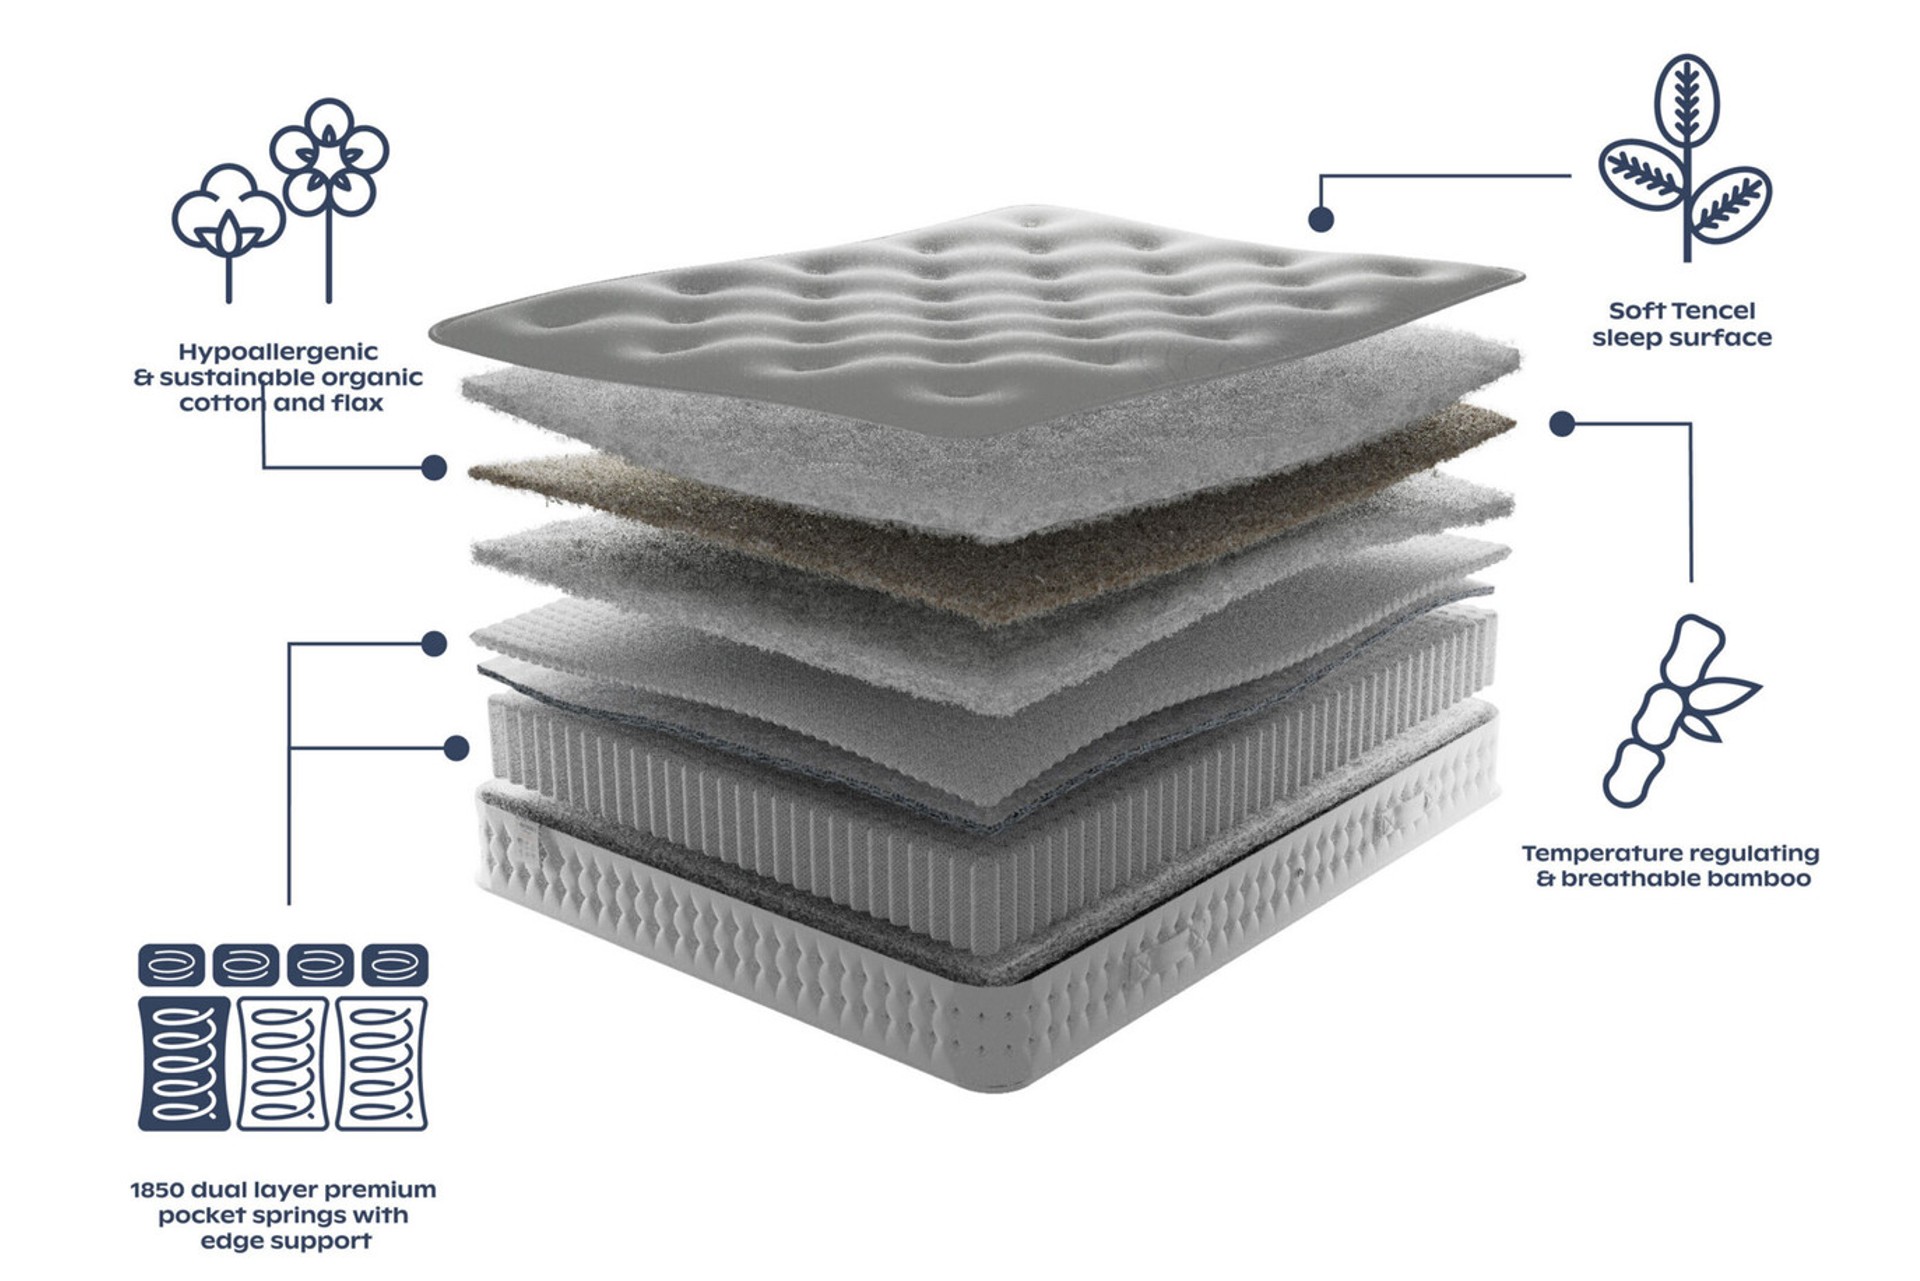 A visual breakdown of the different materials used in the plant-based slumberland mattress